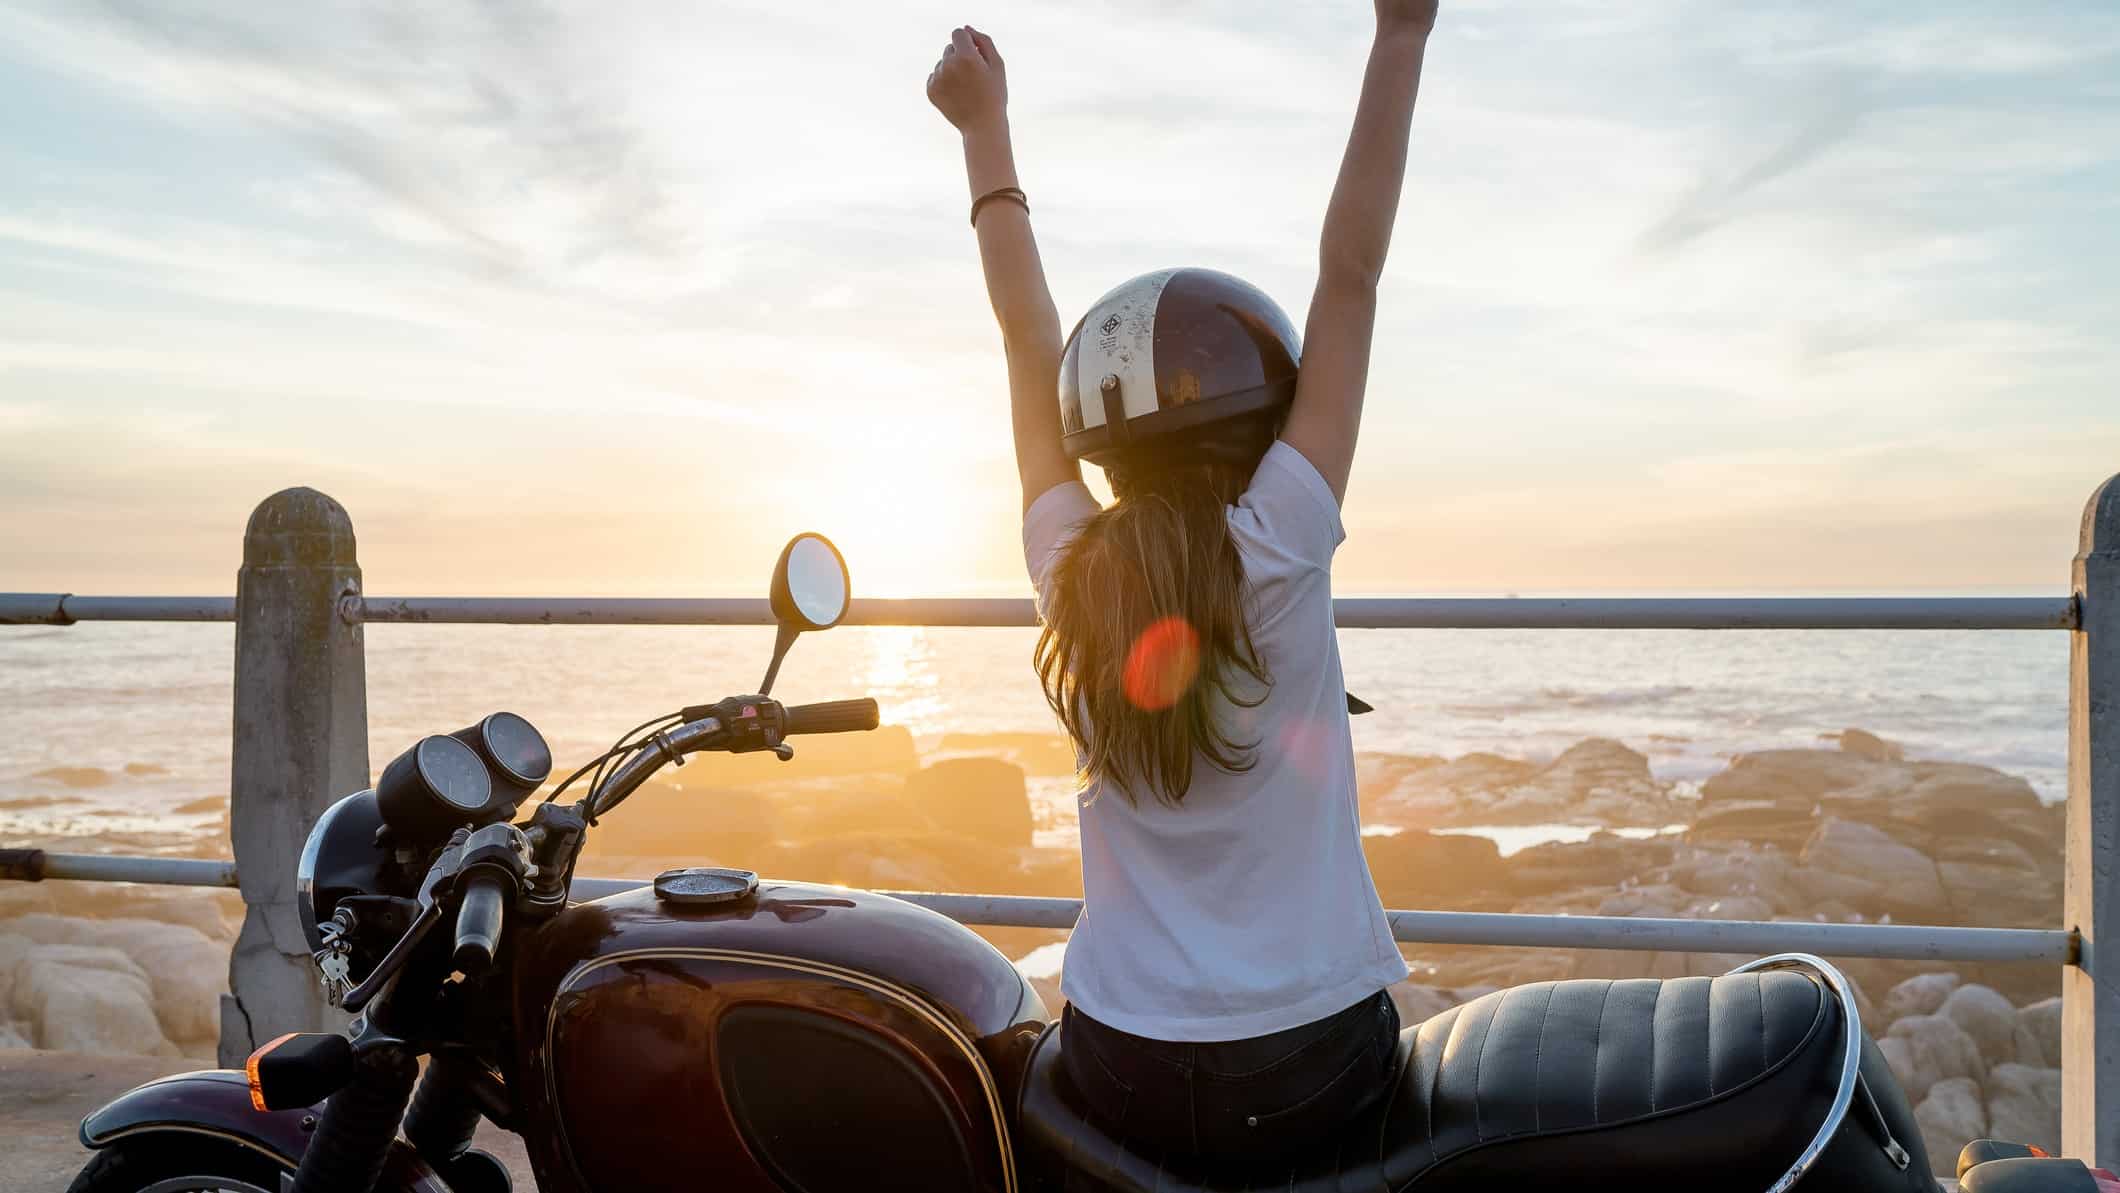 A woman sits on her motorbike looking out at the ocean with both fists in the air.